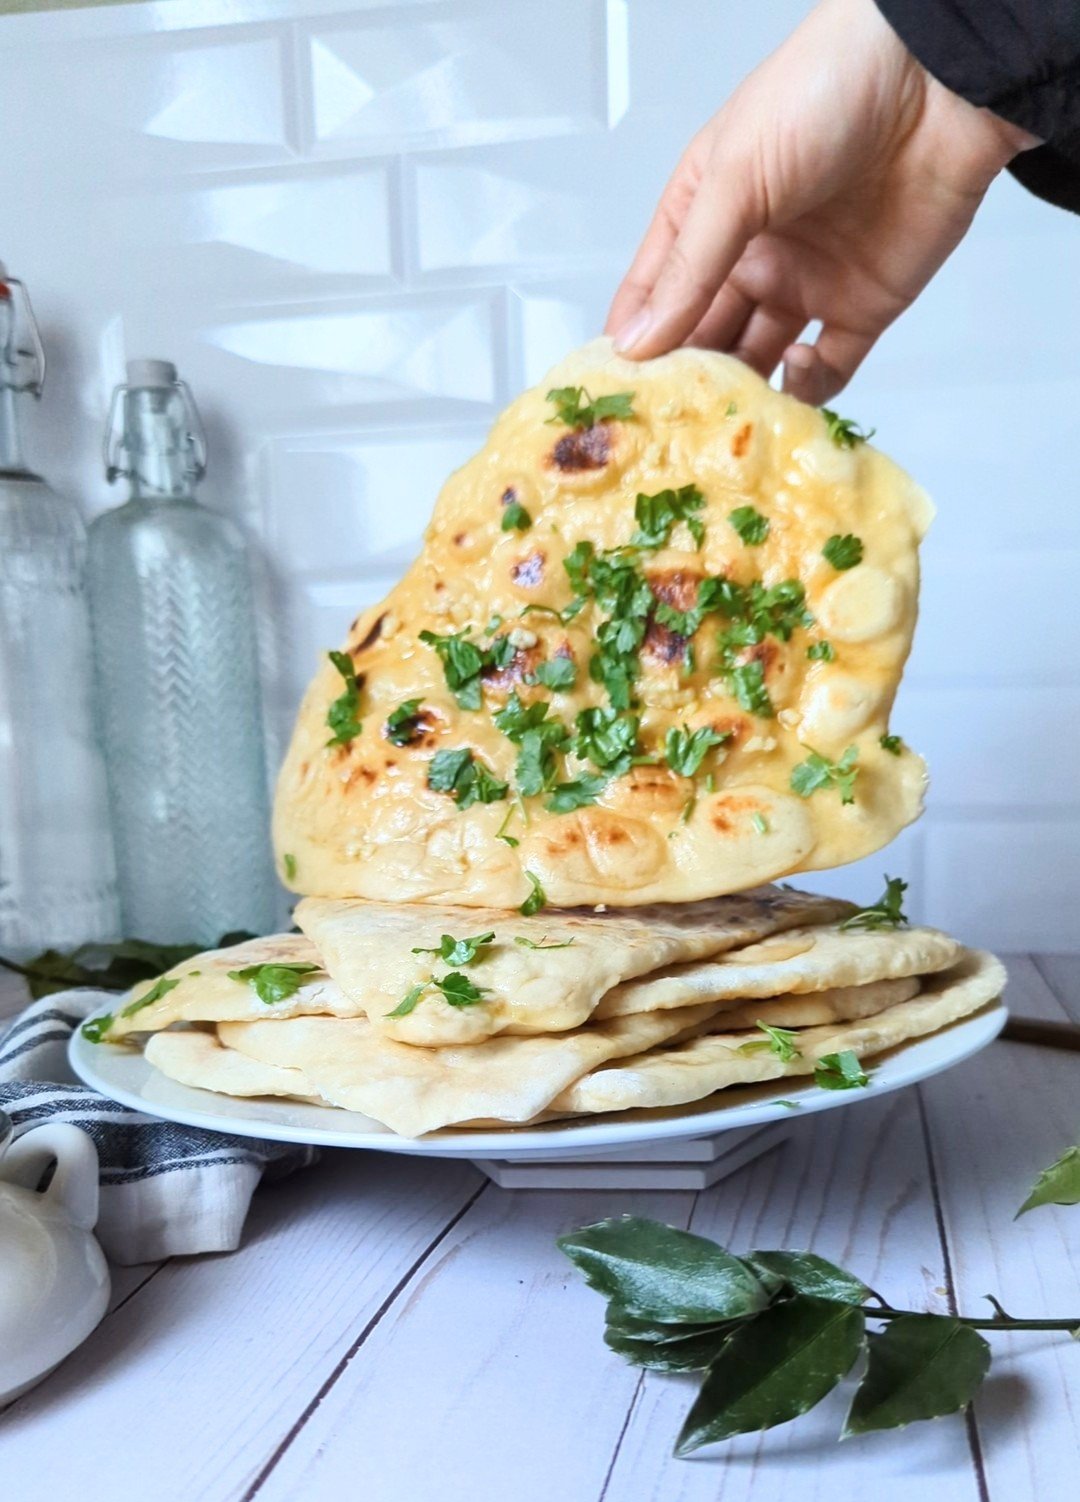 sourdough starter naan recipe to make with sourdough discard flatbread naan flat breads healthy homemade no eggs no dairy almond milk plant based recipes